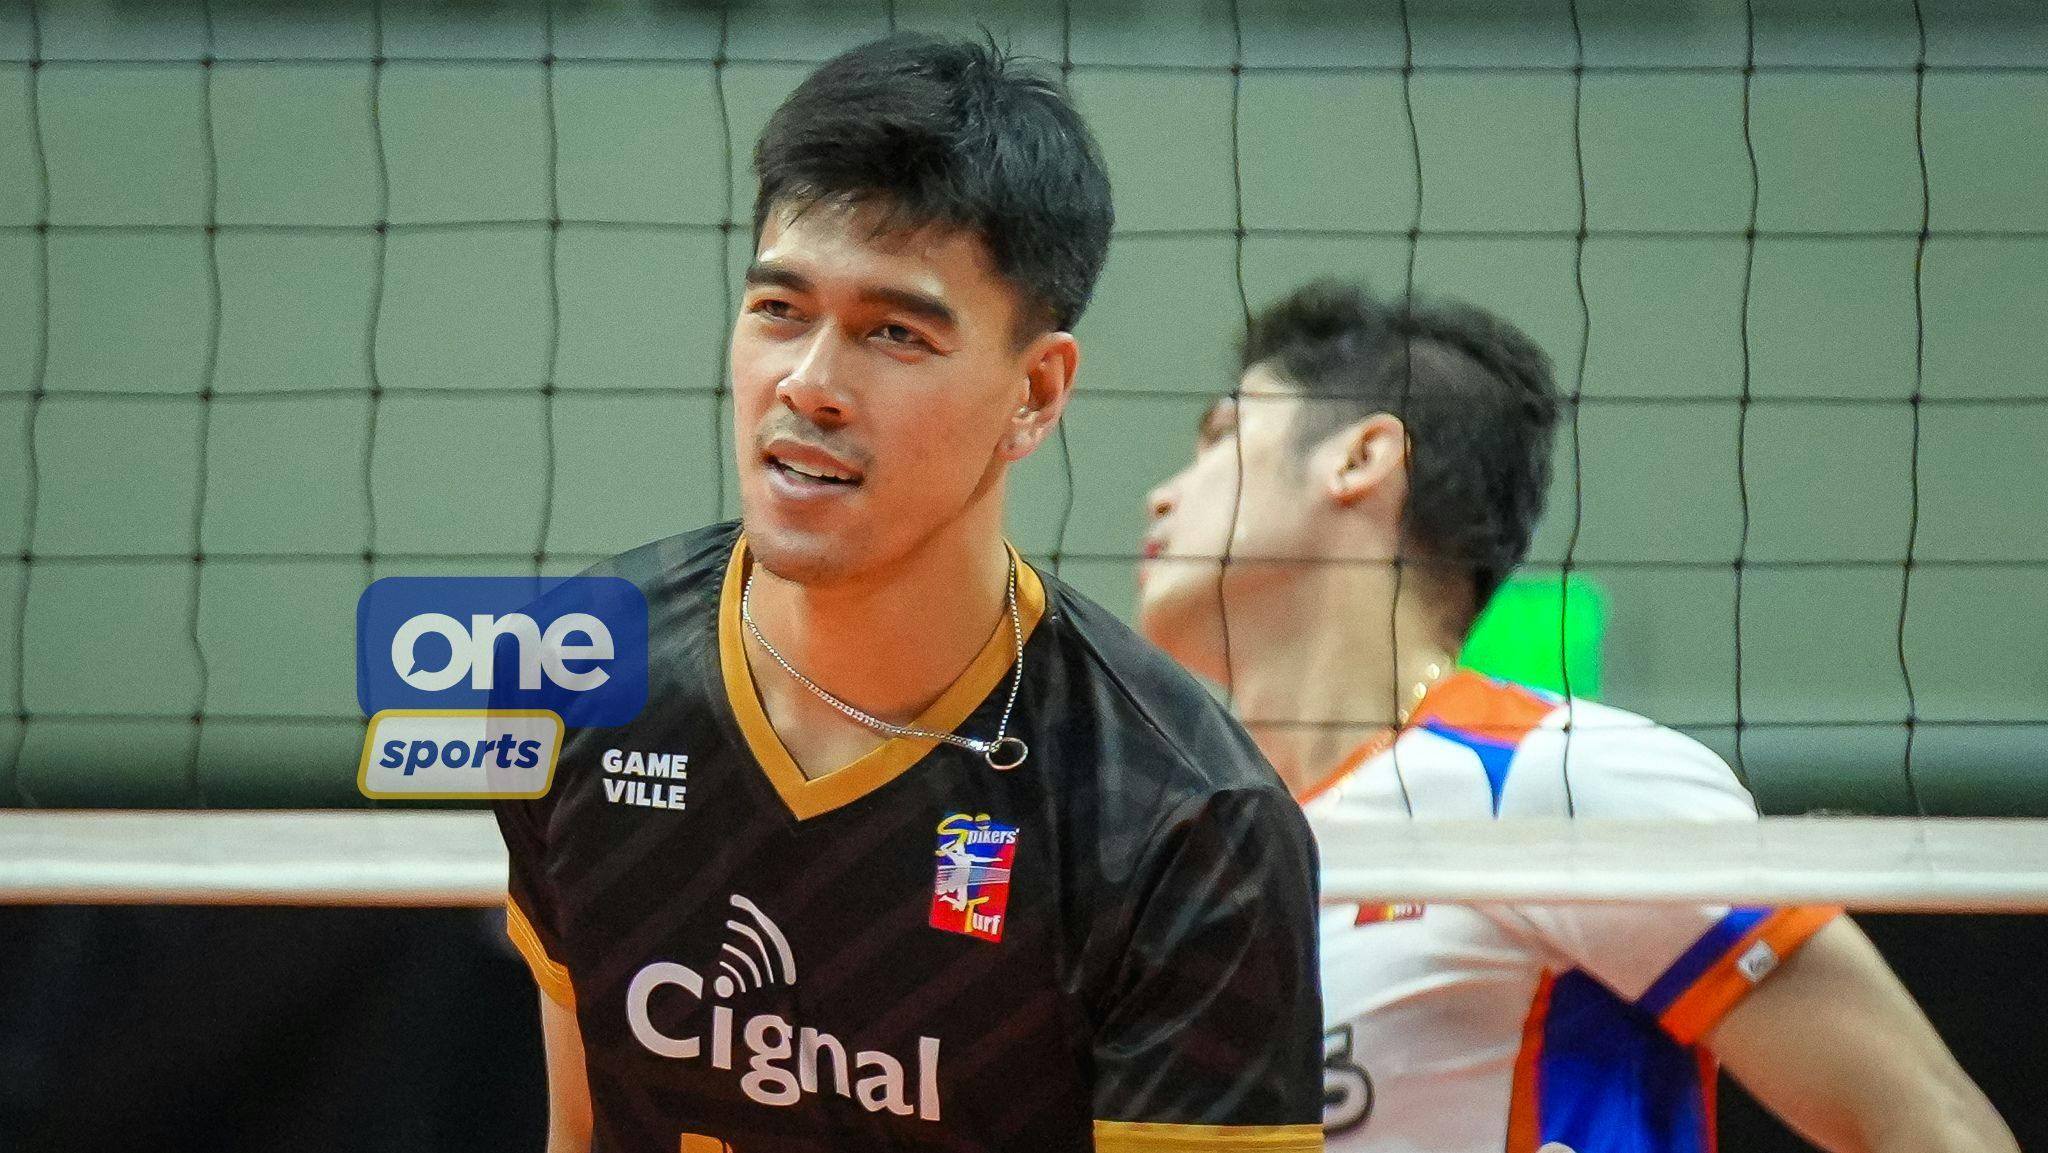 Spikers’ Turf: Bryan Bagunas, Cignal sweep Criss Cross, retain crown in Open Conference 